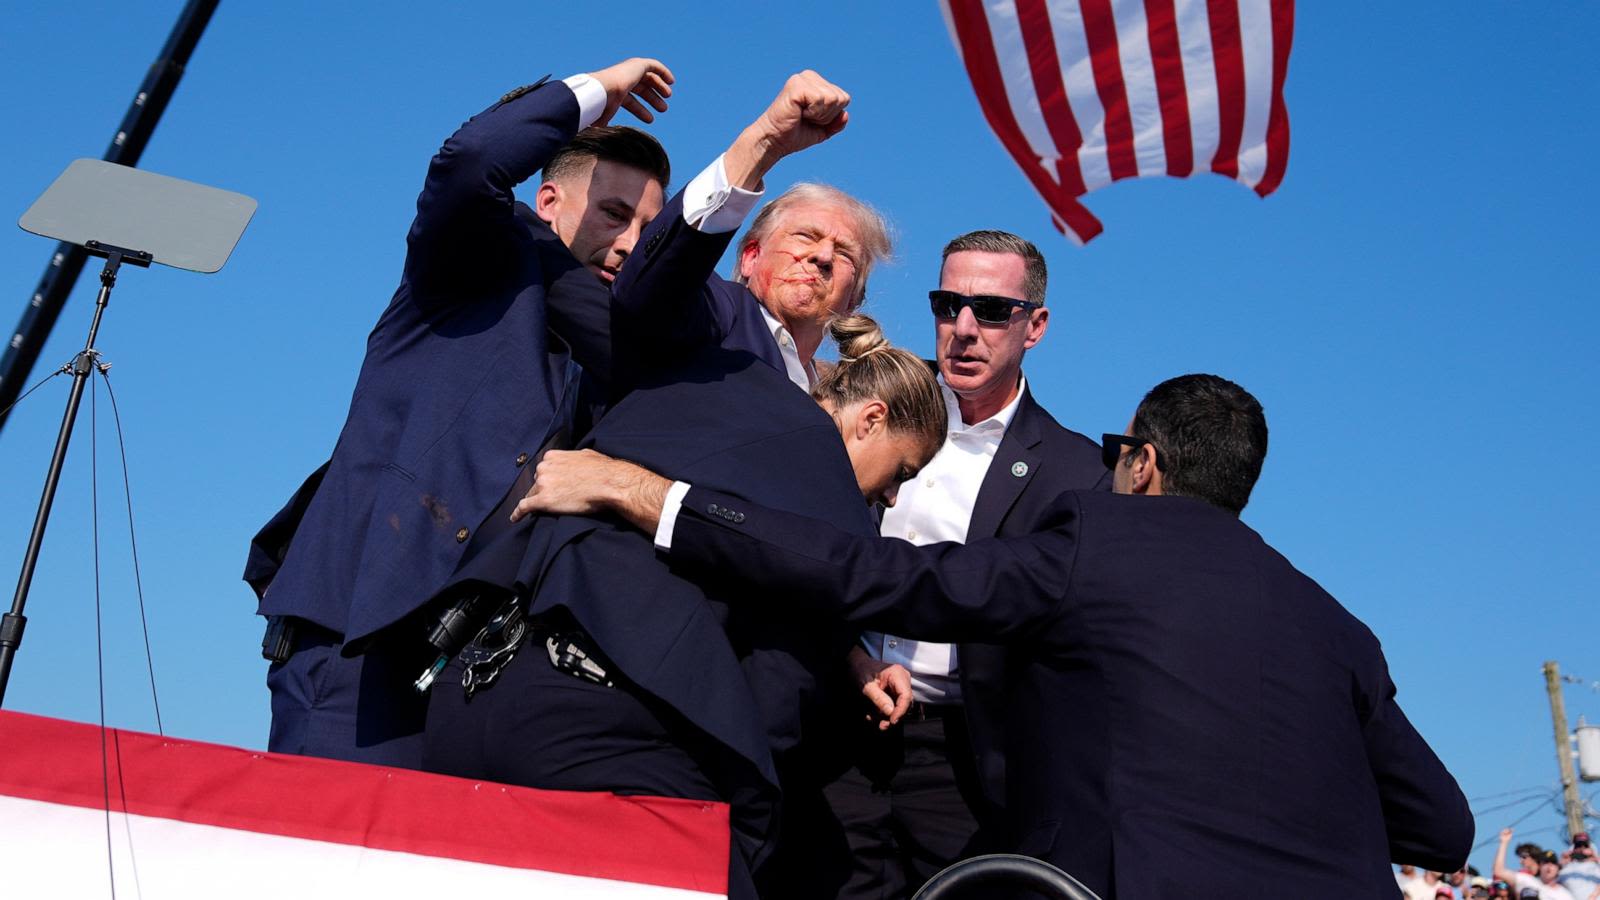 Trump rushed off stage by Secret Service as possible shots heard at Pennsylvania rally; former president 'fine,' spokesperson says